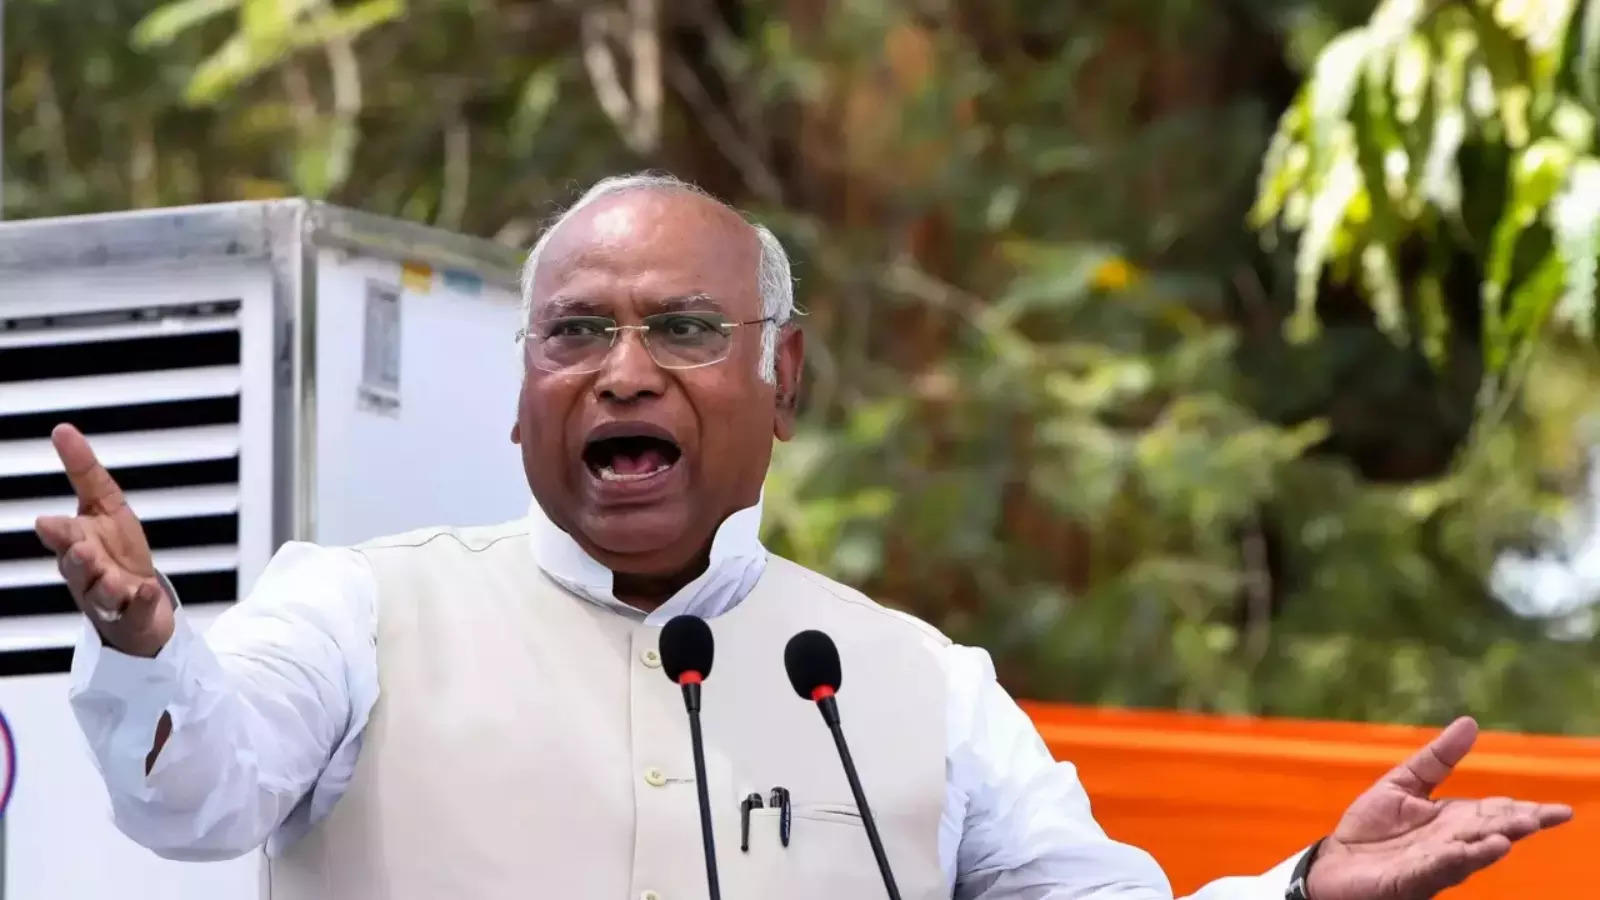 Kharge could create anarchic situation, claims baseless, says EC; Cong hits back